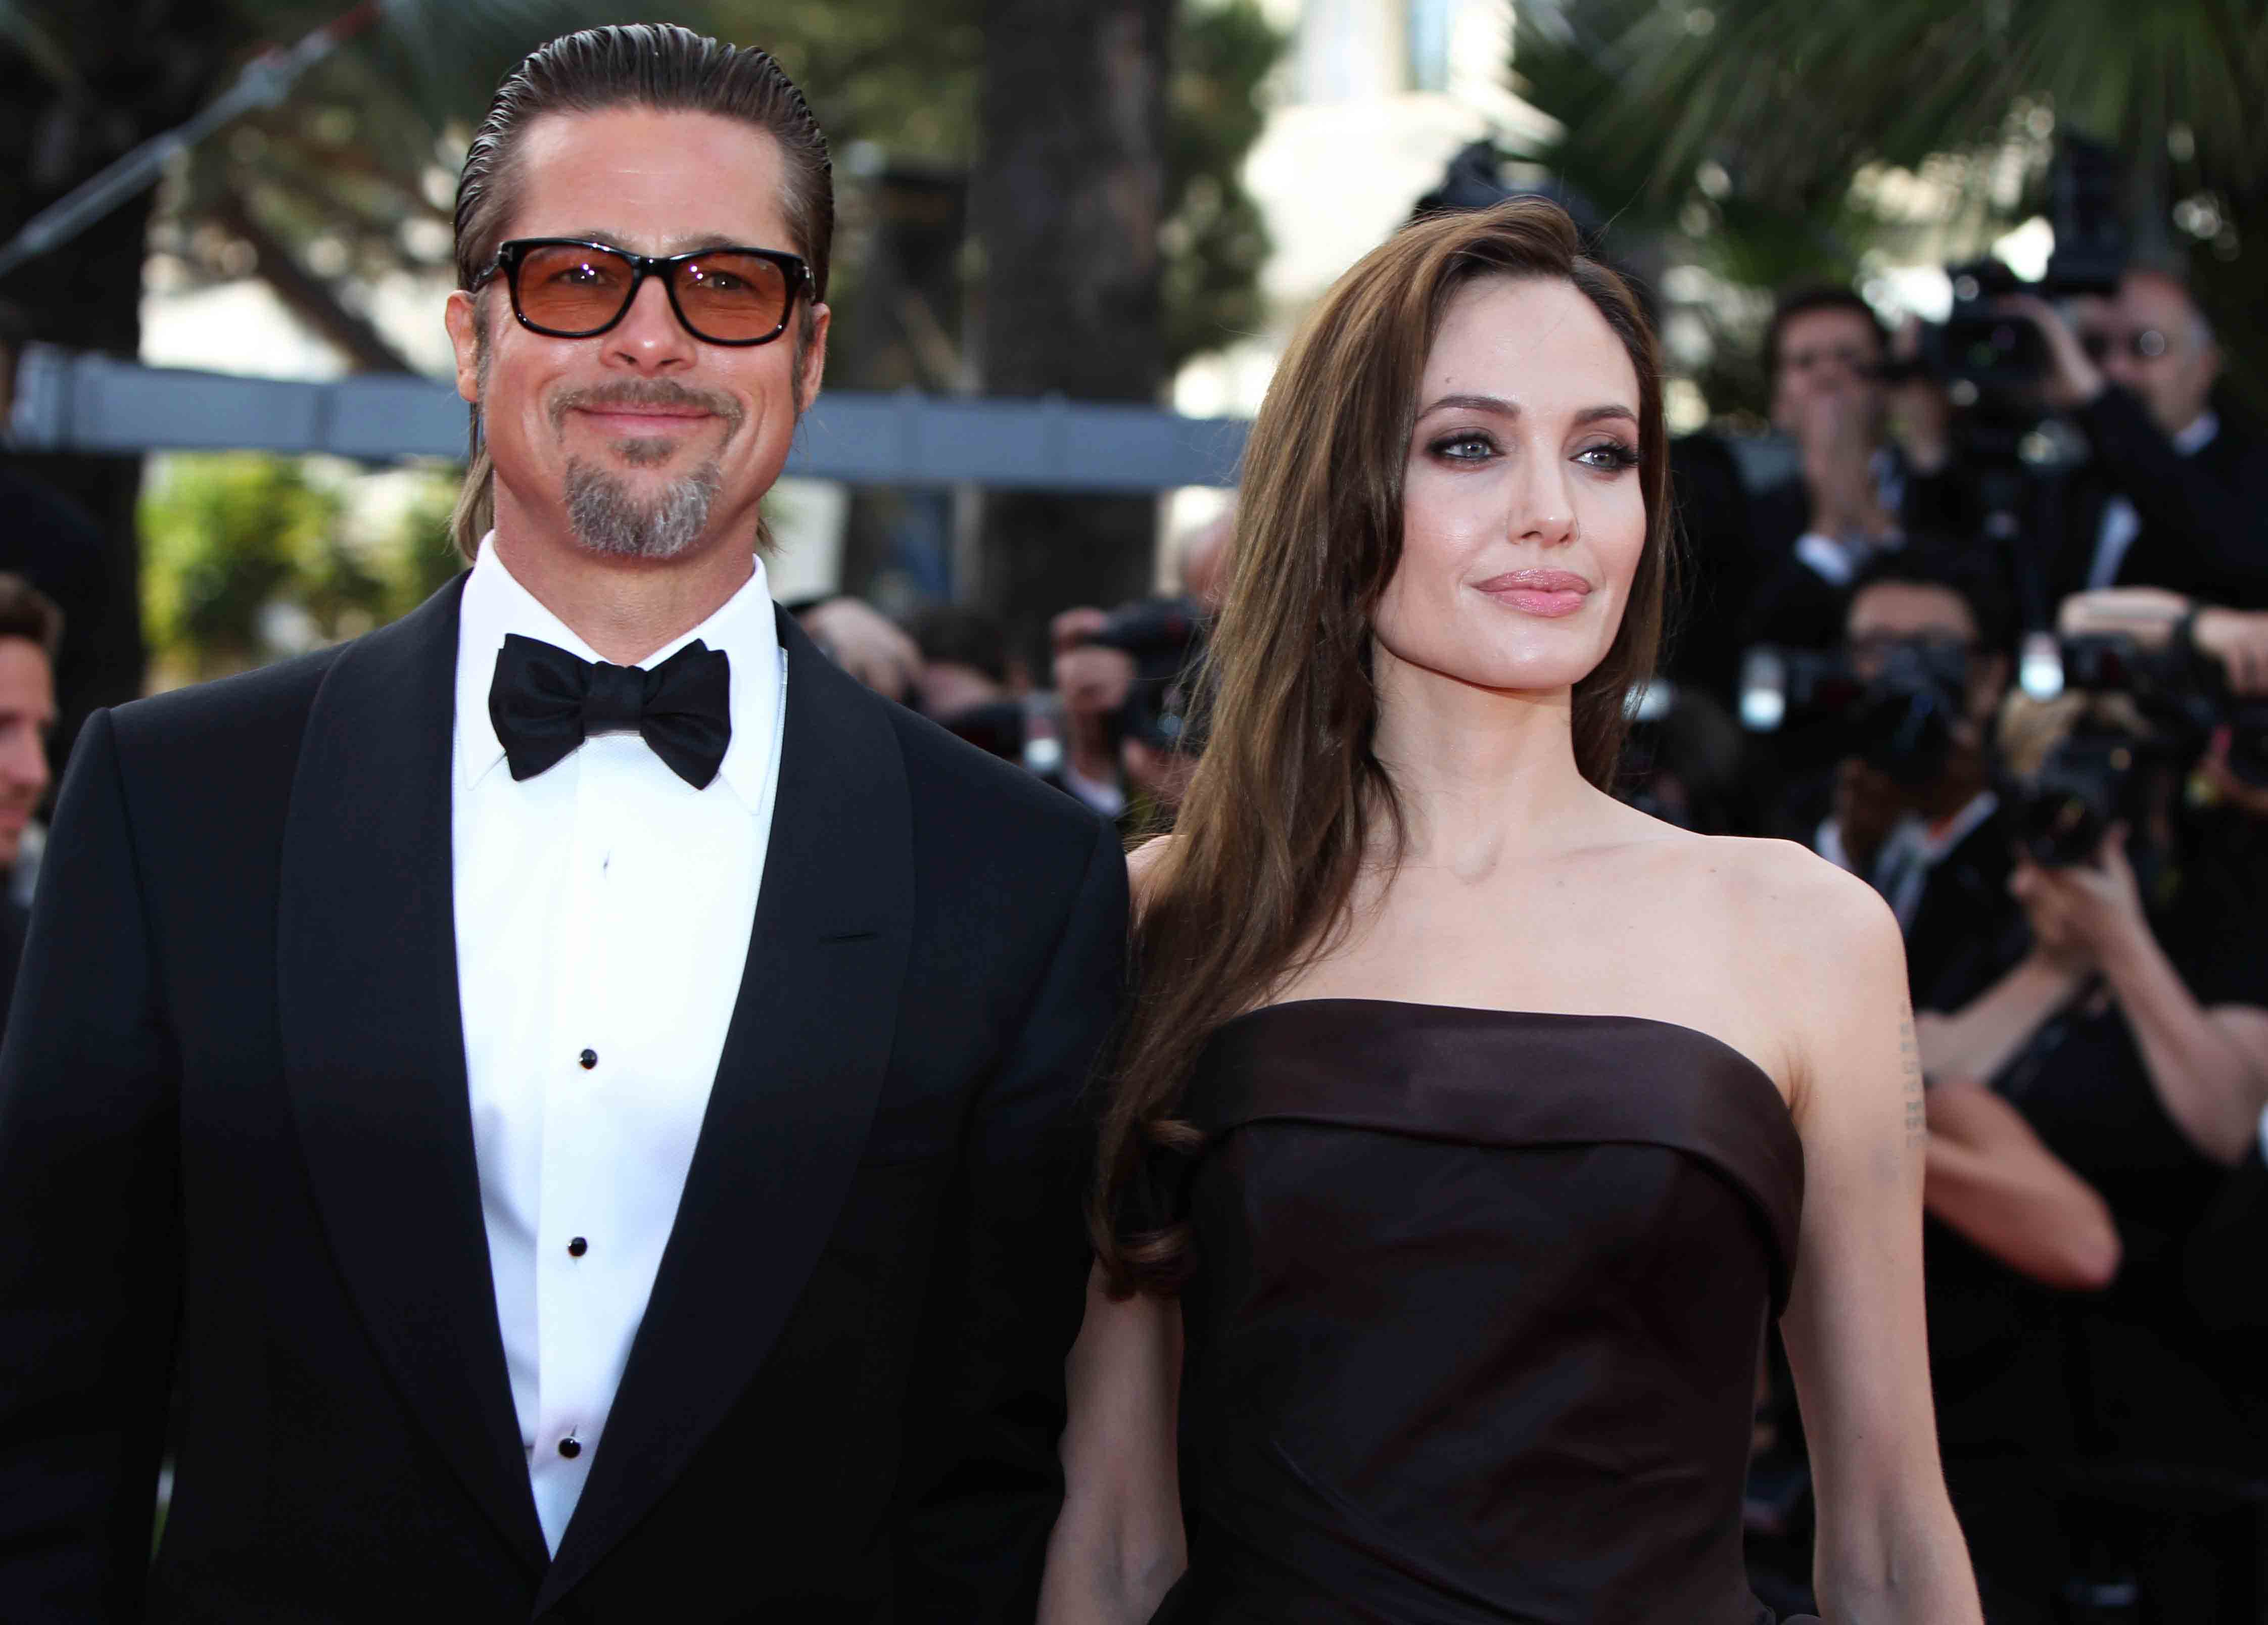 Angelina Jolie supports Brad Pitt at the Cannes Film premiere